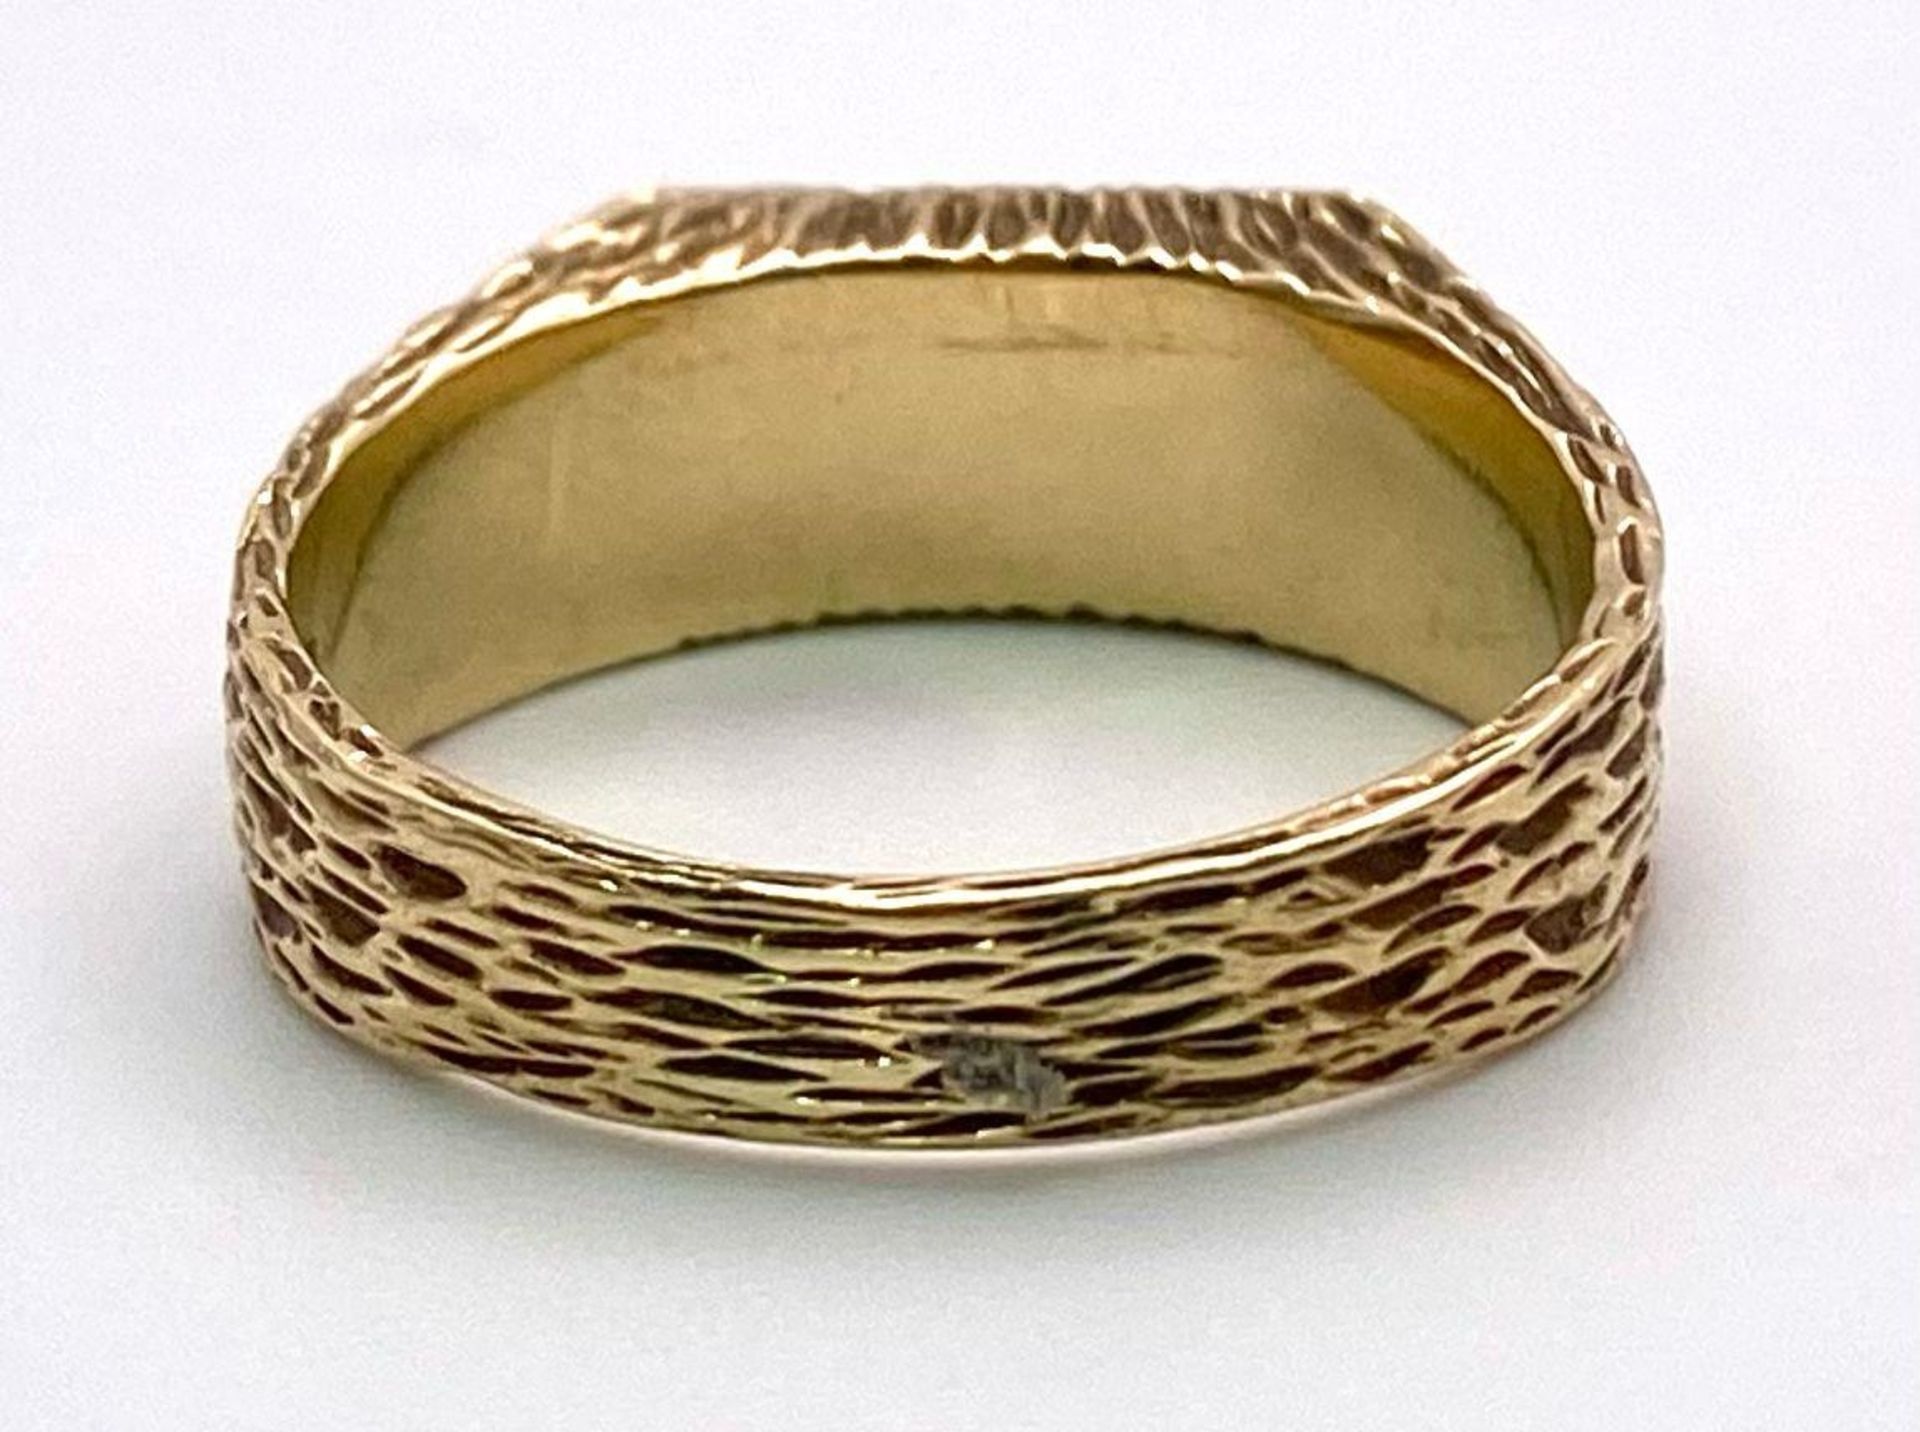 A Vintage 9K Yellow Gold and Diamond Signet Ring with Bark-Effect Decoration Throughout. Size Q/R. - Image 3 of 4